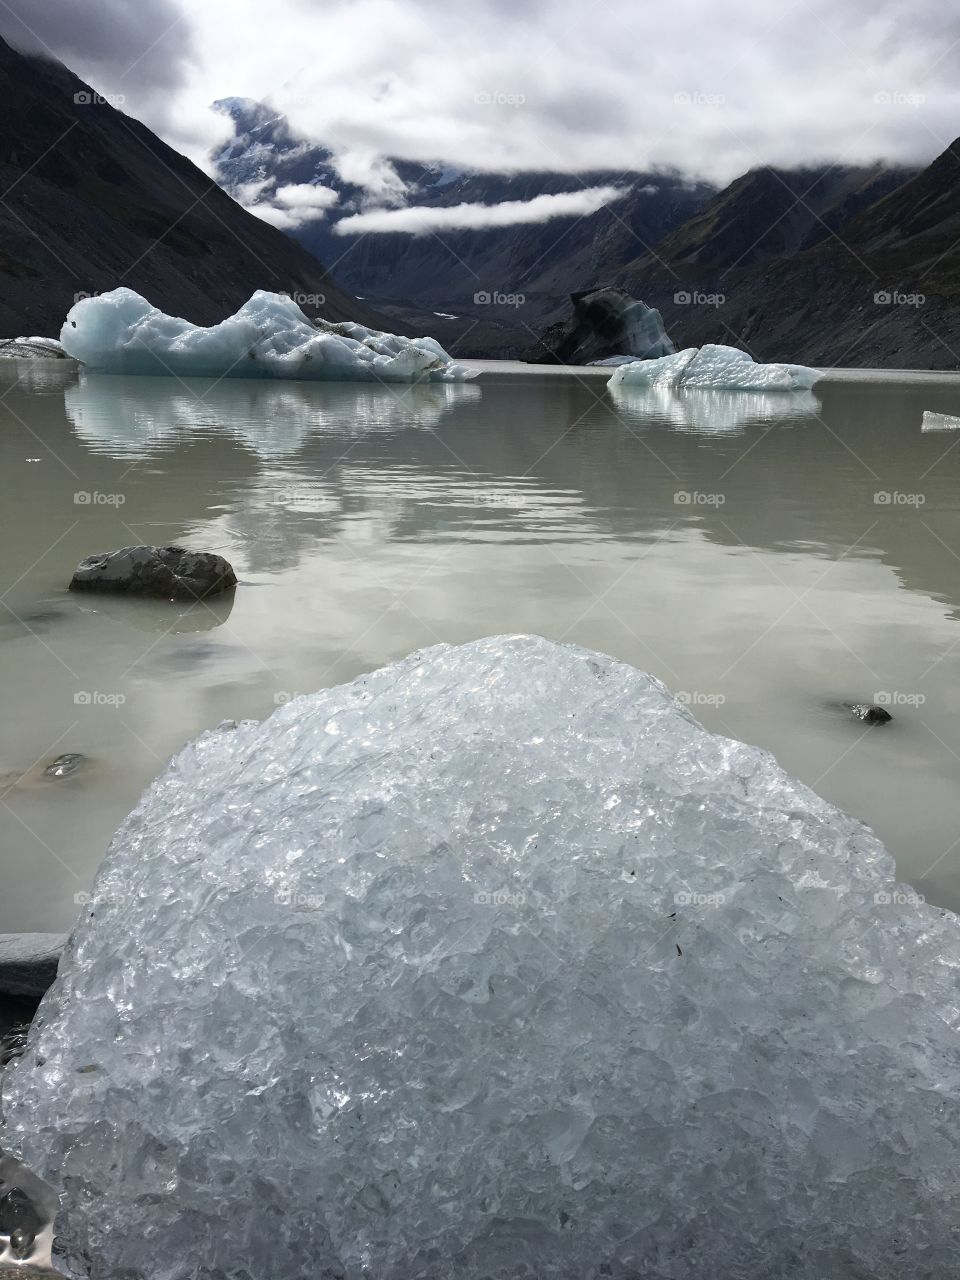 Up close and personal with an iceberg from Hooker Glacier, Mt. Cook, New Zealand